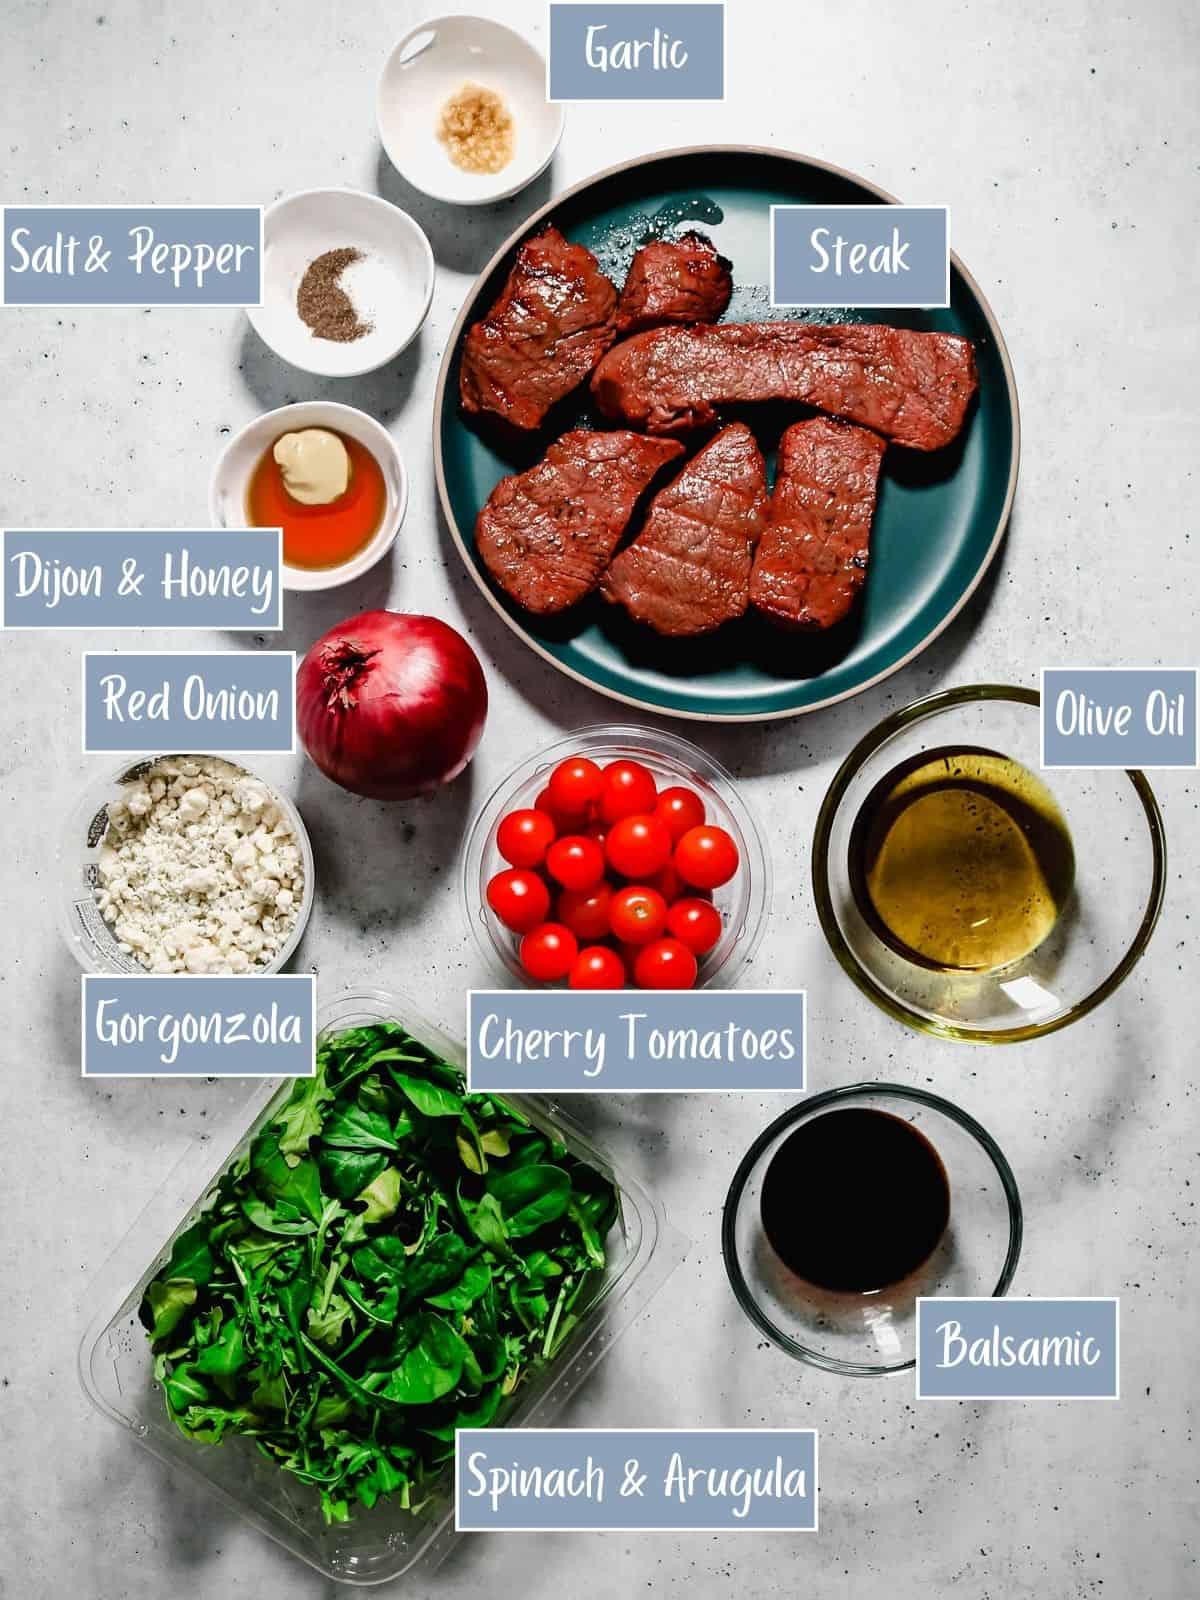 Labeled ingredients used to make an arugula spinach steak salad.